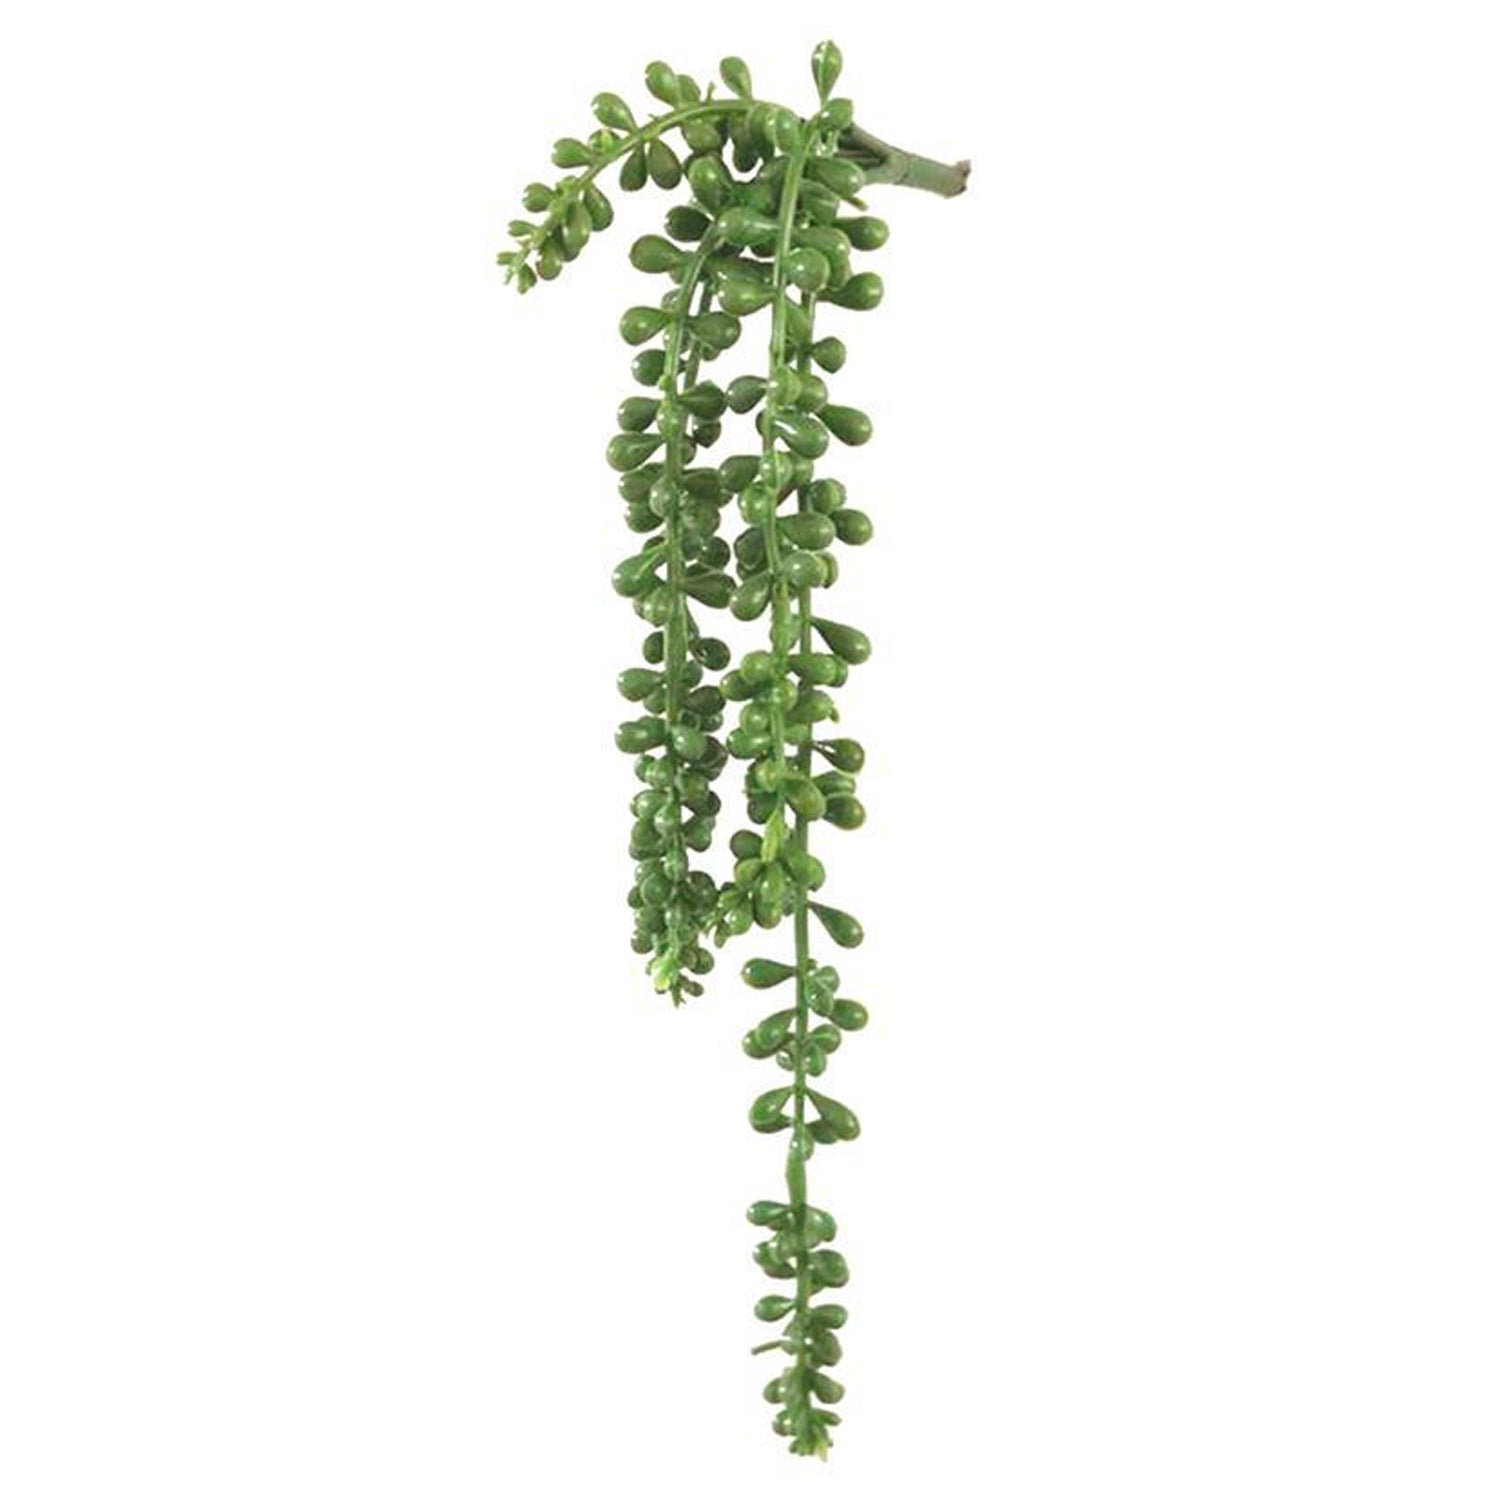 Fake String of Pearls Hanging Plants Vine Shelf Decor Bedroom Aesthetic –  the Peachy Day